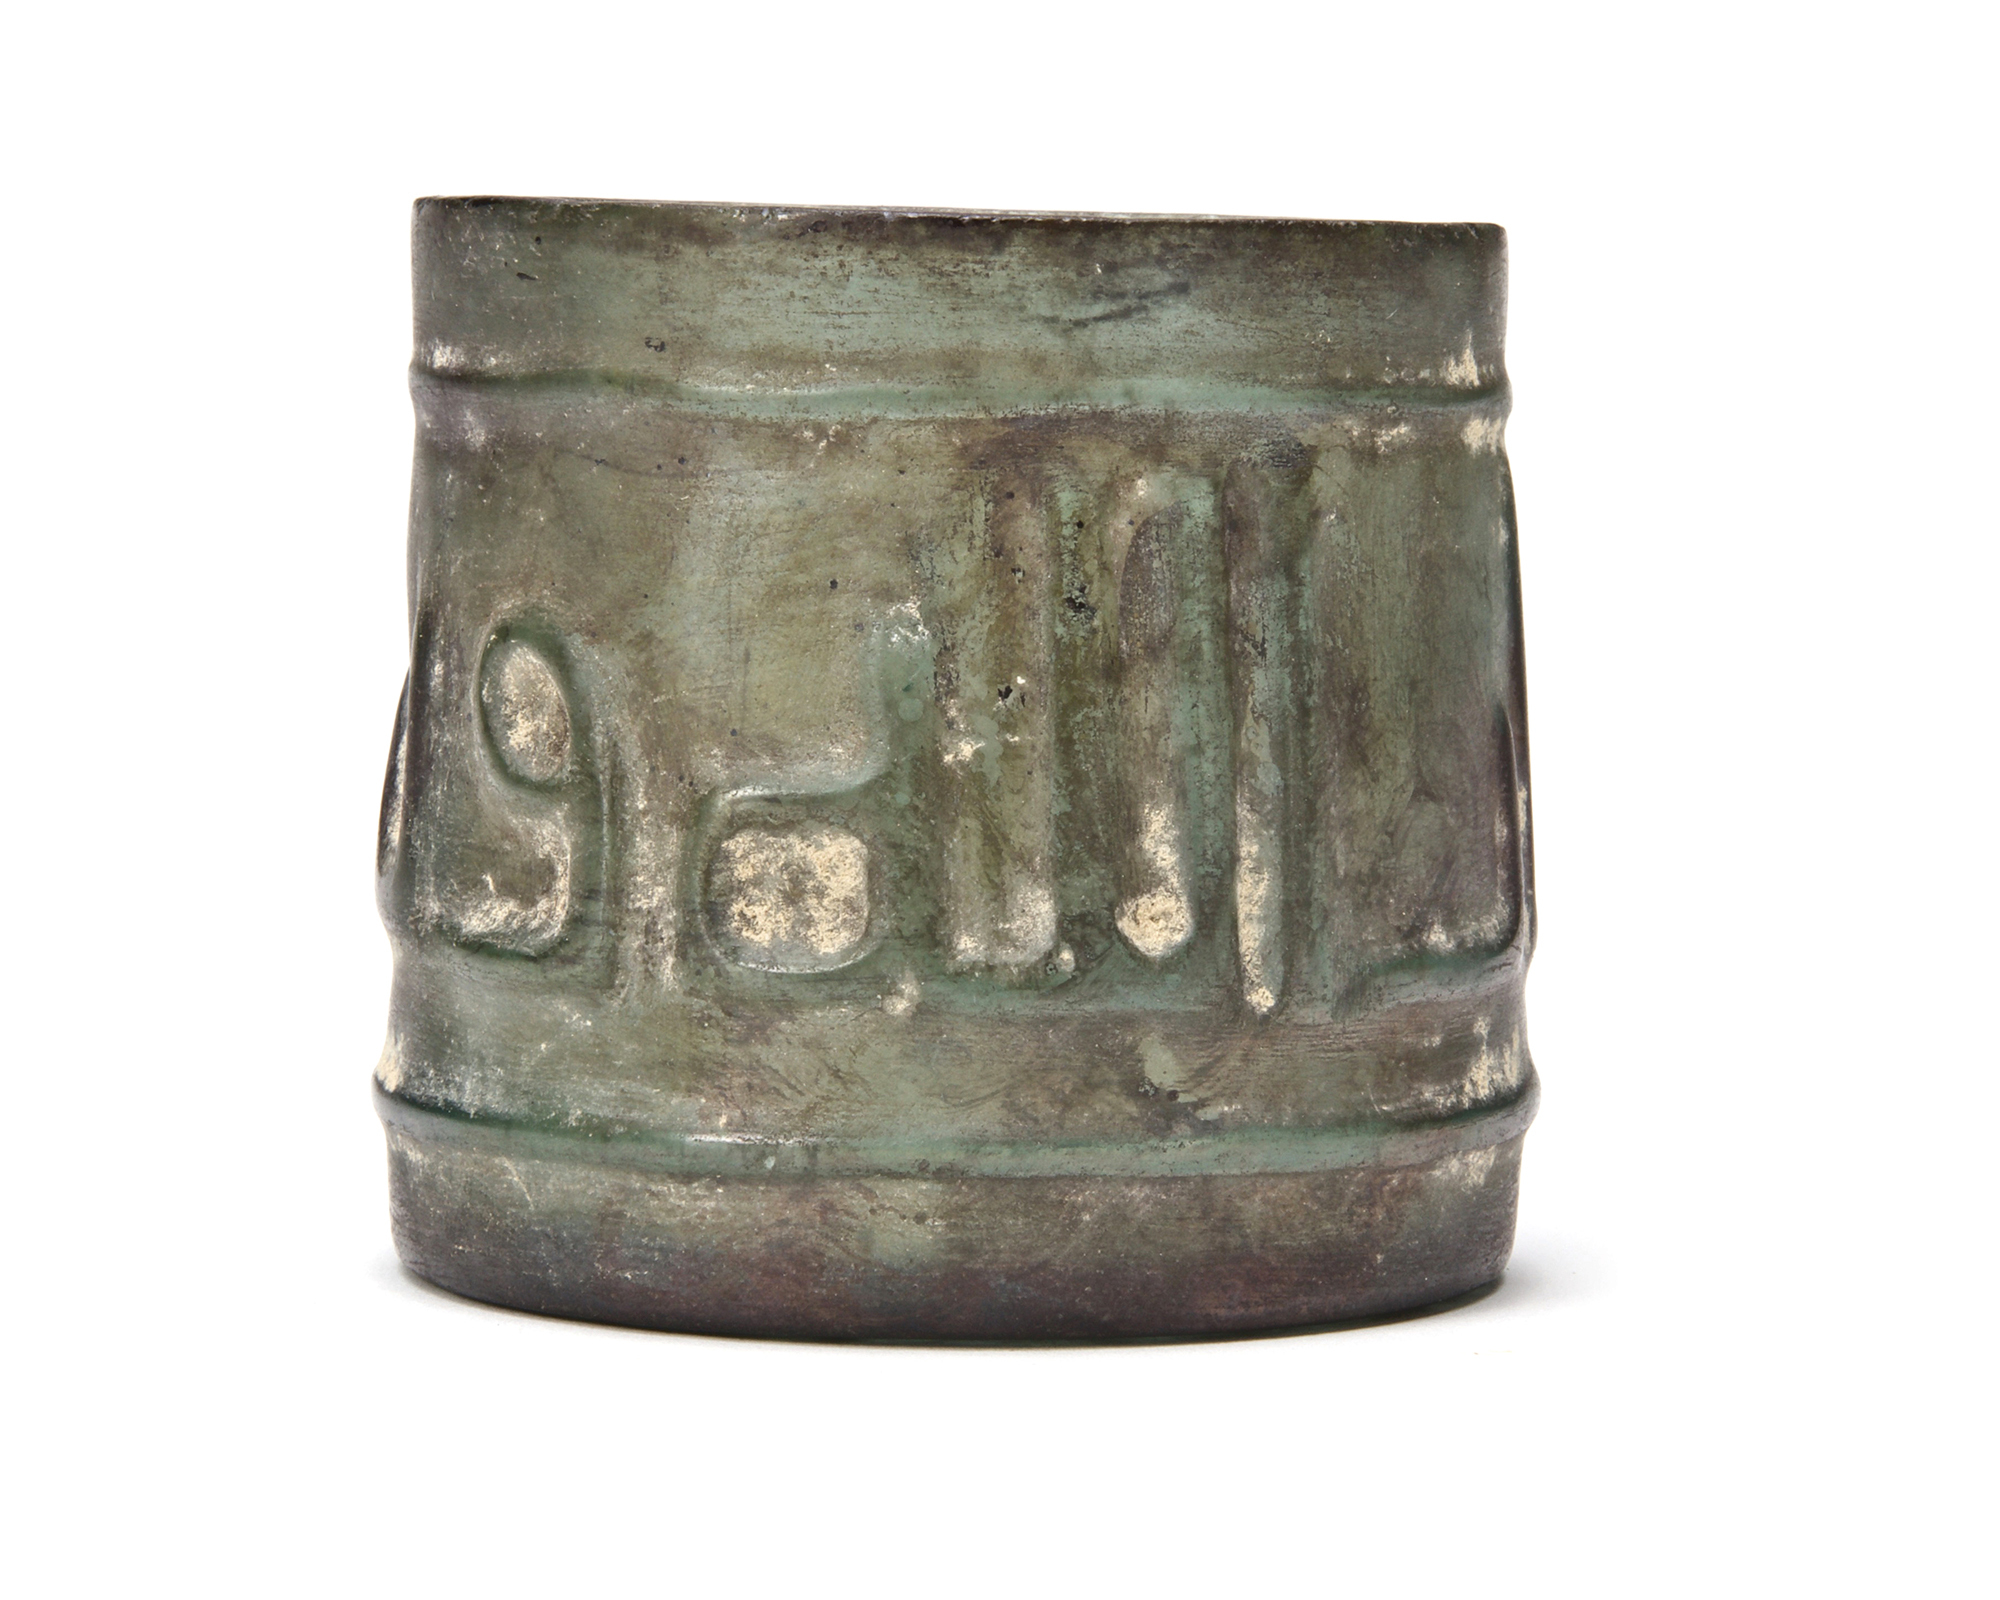 A GLASS BEAKER, SYRIA, 10TH-11TH CENTURY - Image 4 of 14